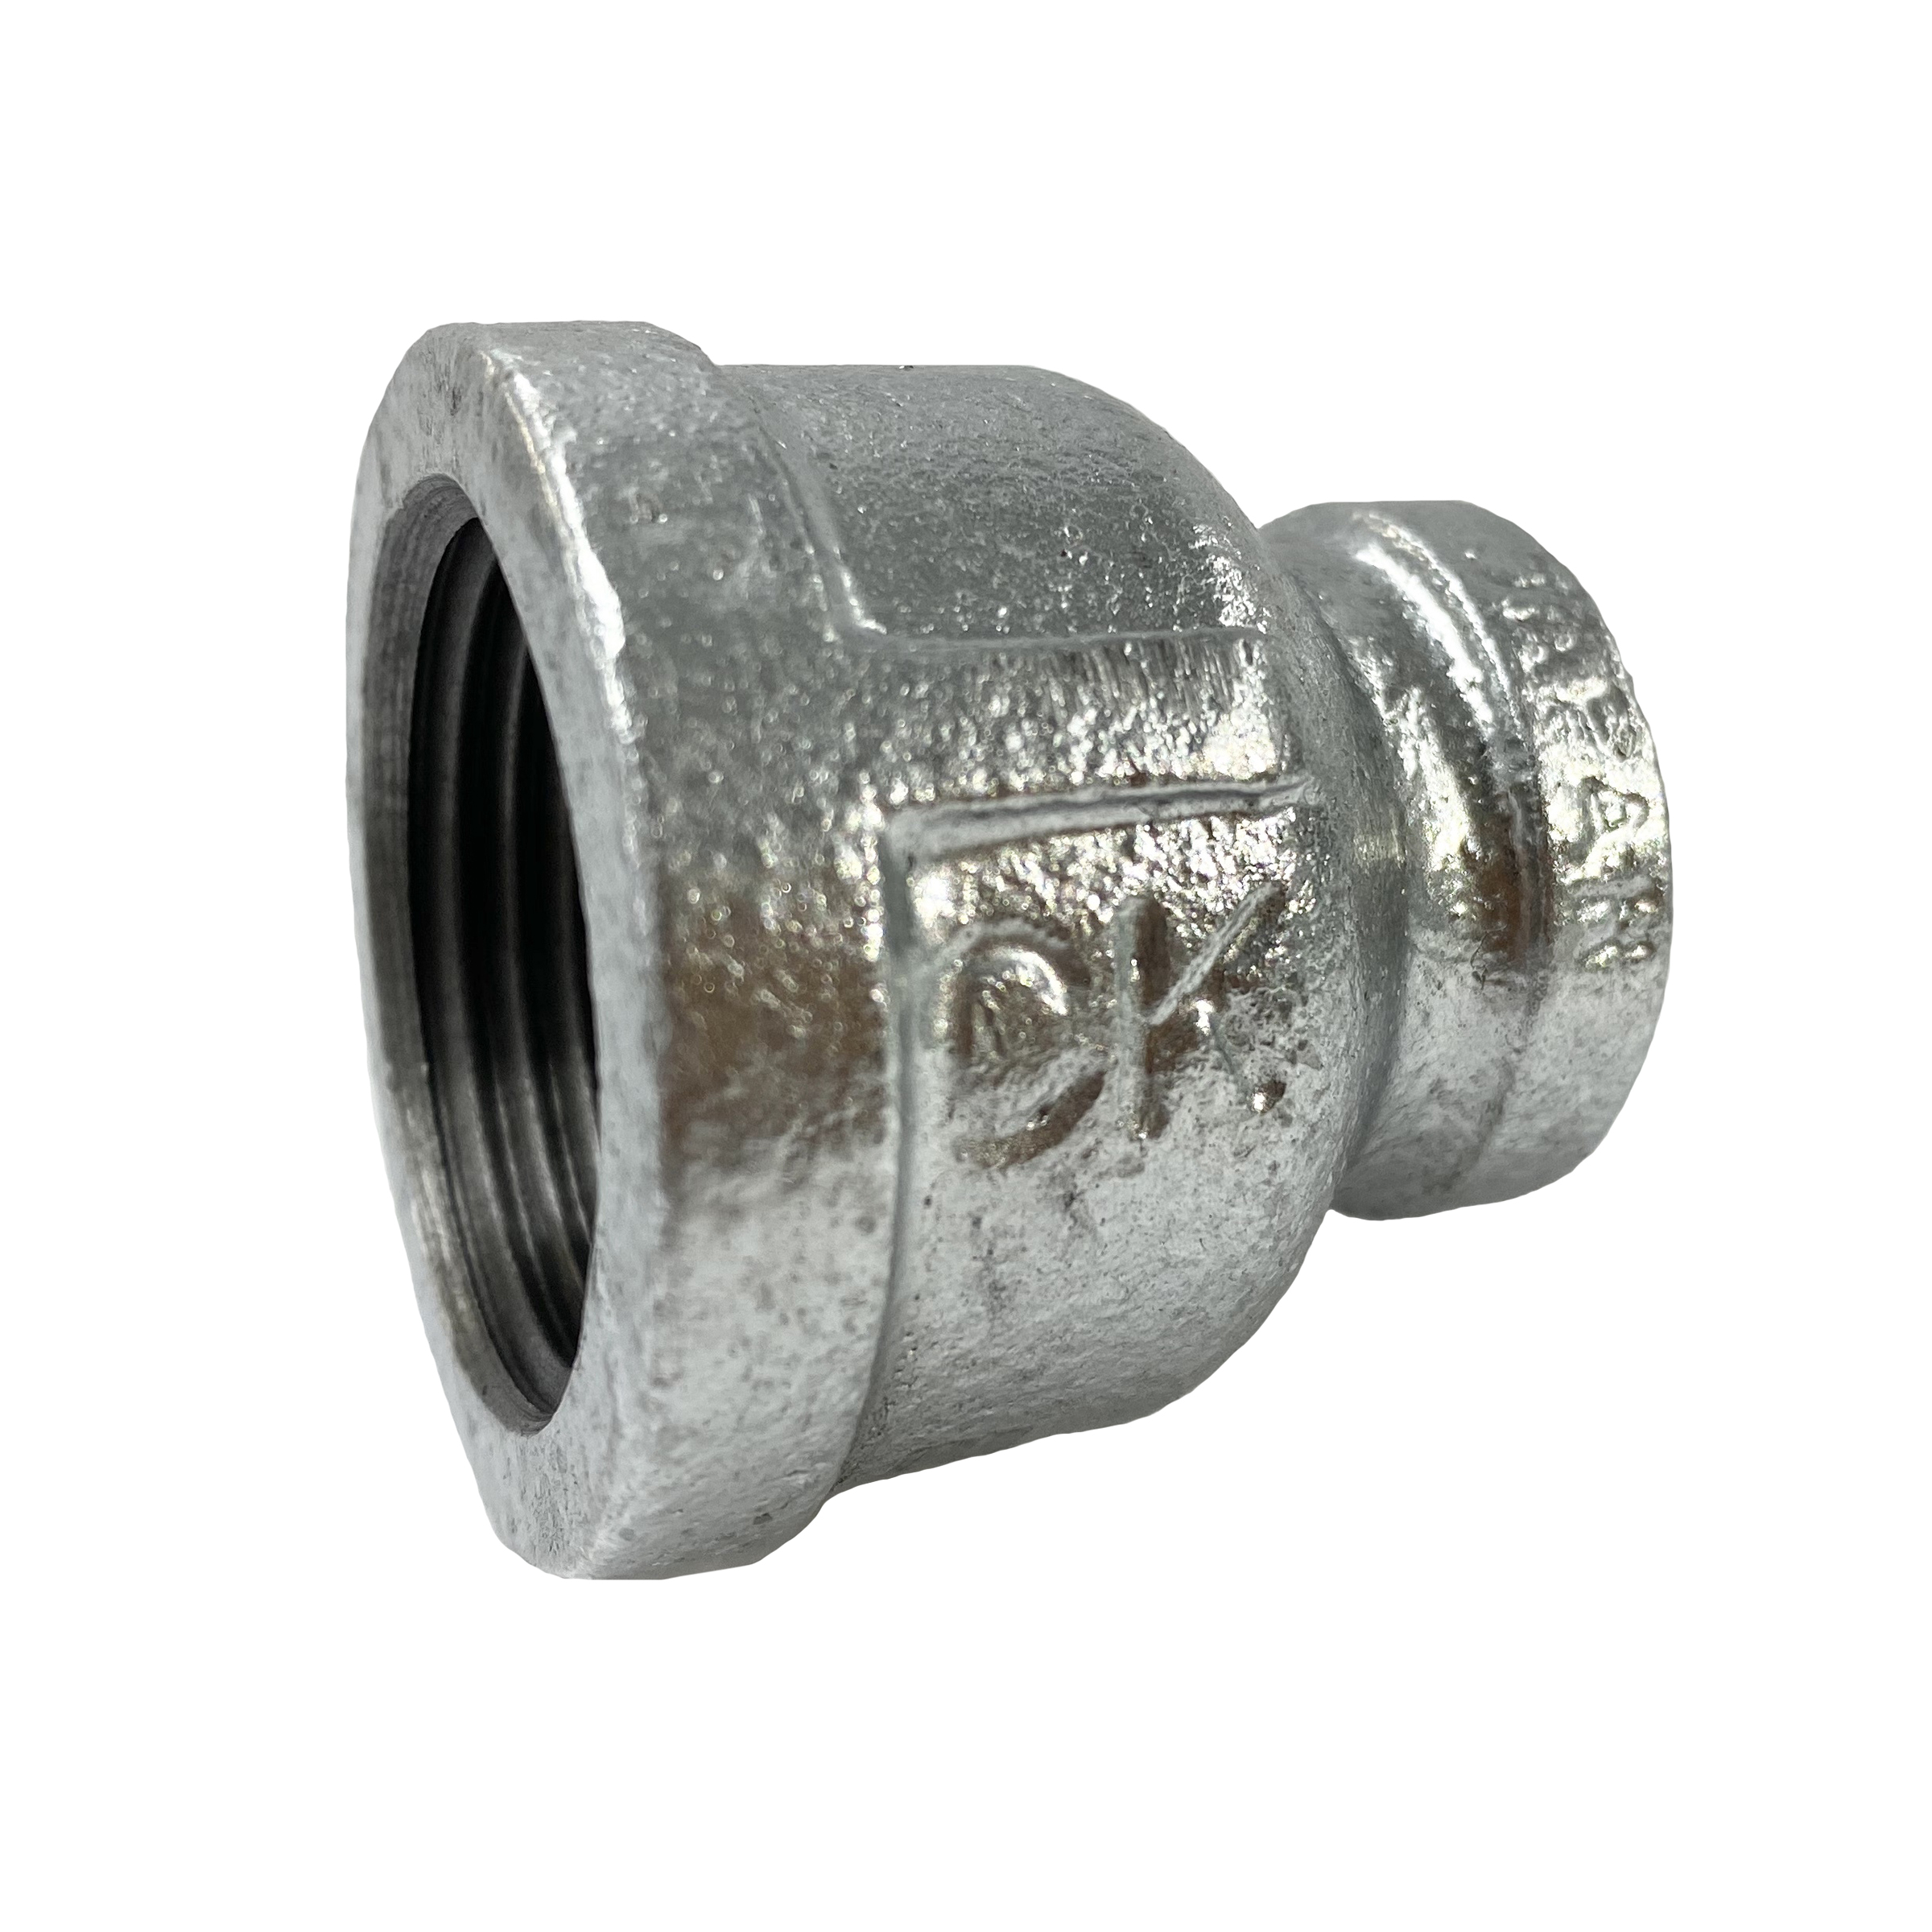 CK Fittings - Screw-in Type Malleable Cast Iron Pipe Fitting - Socket with Different Diameters with Band BRS-50X25-W